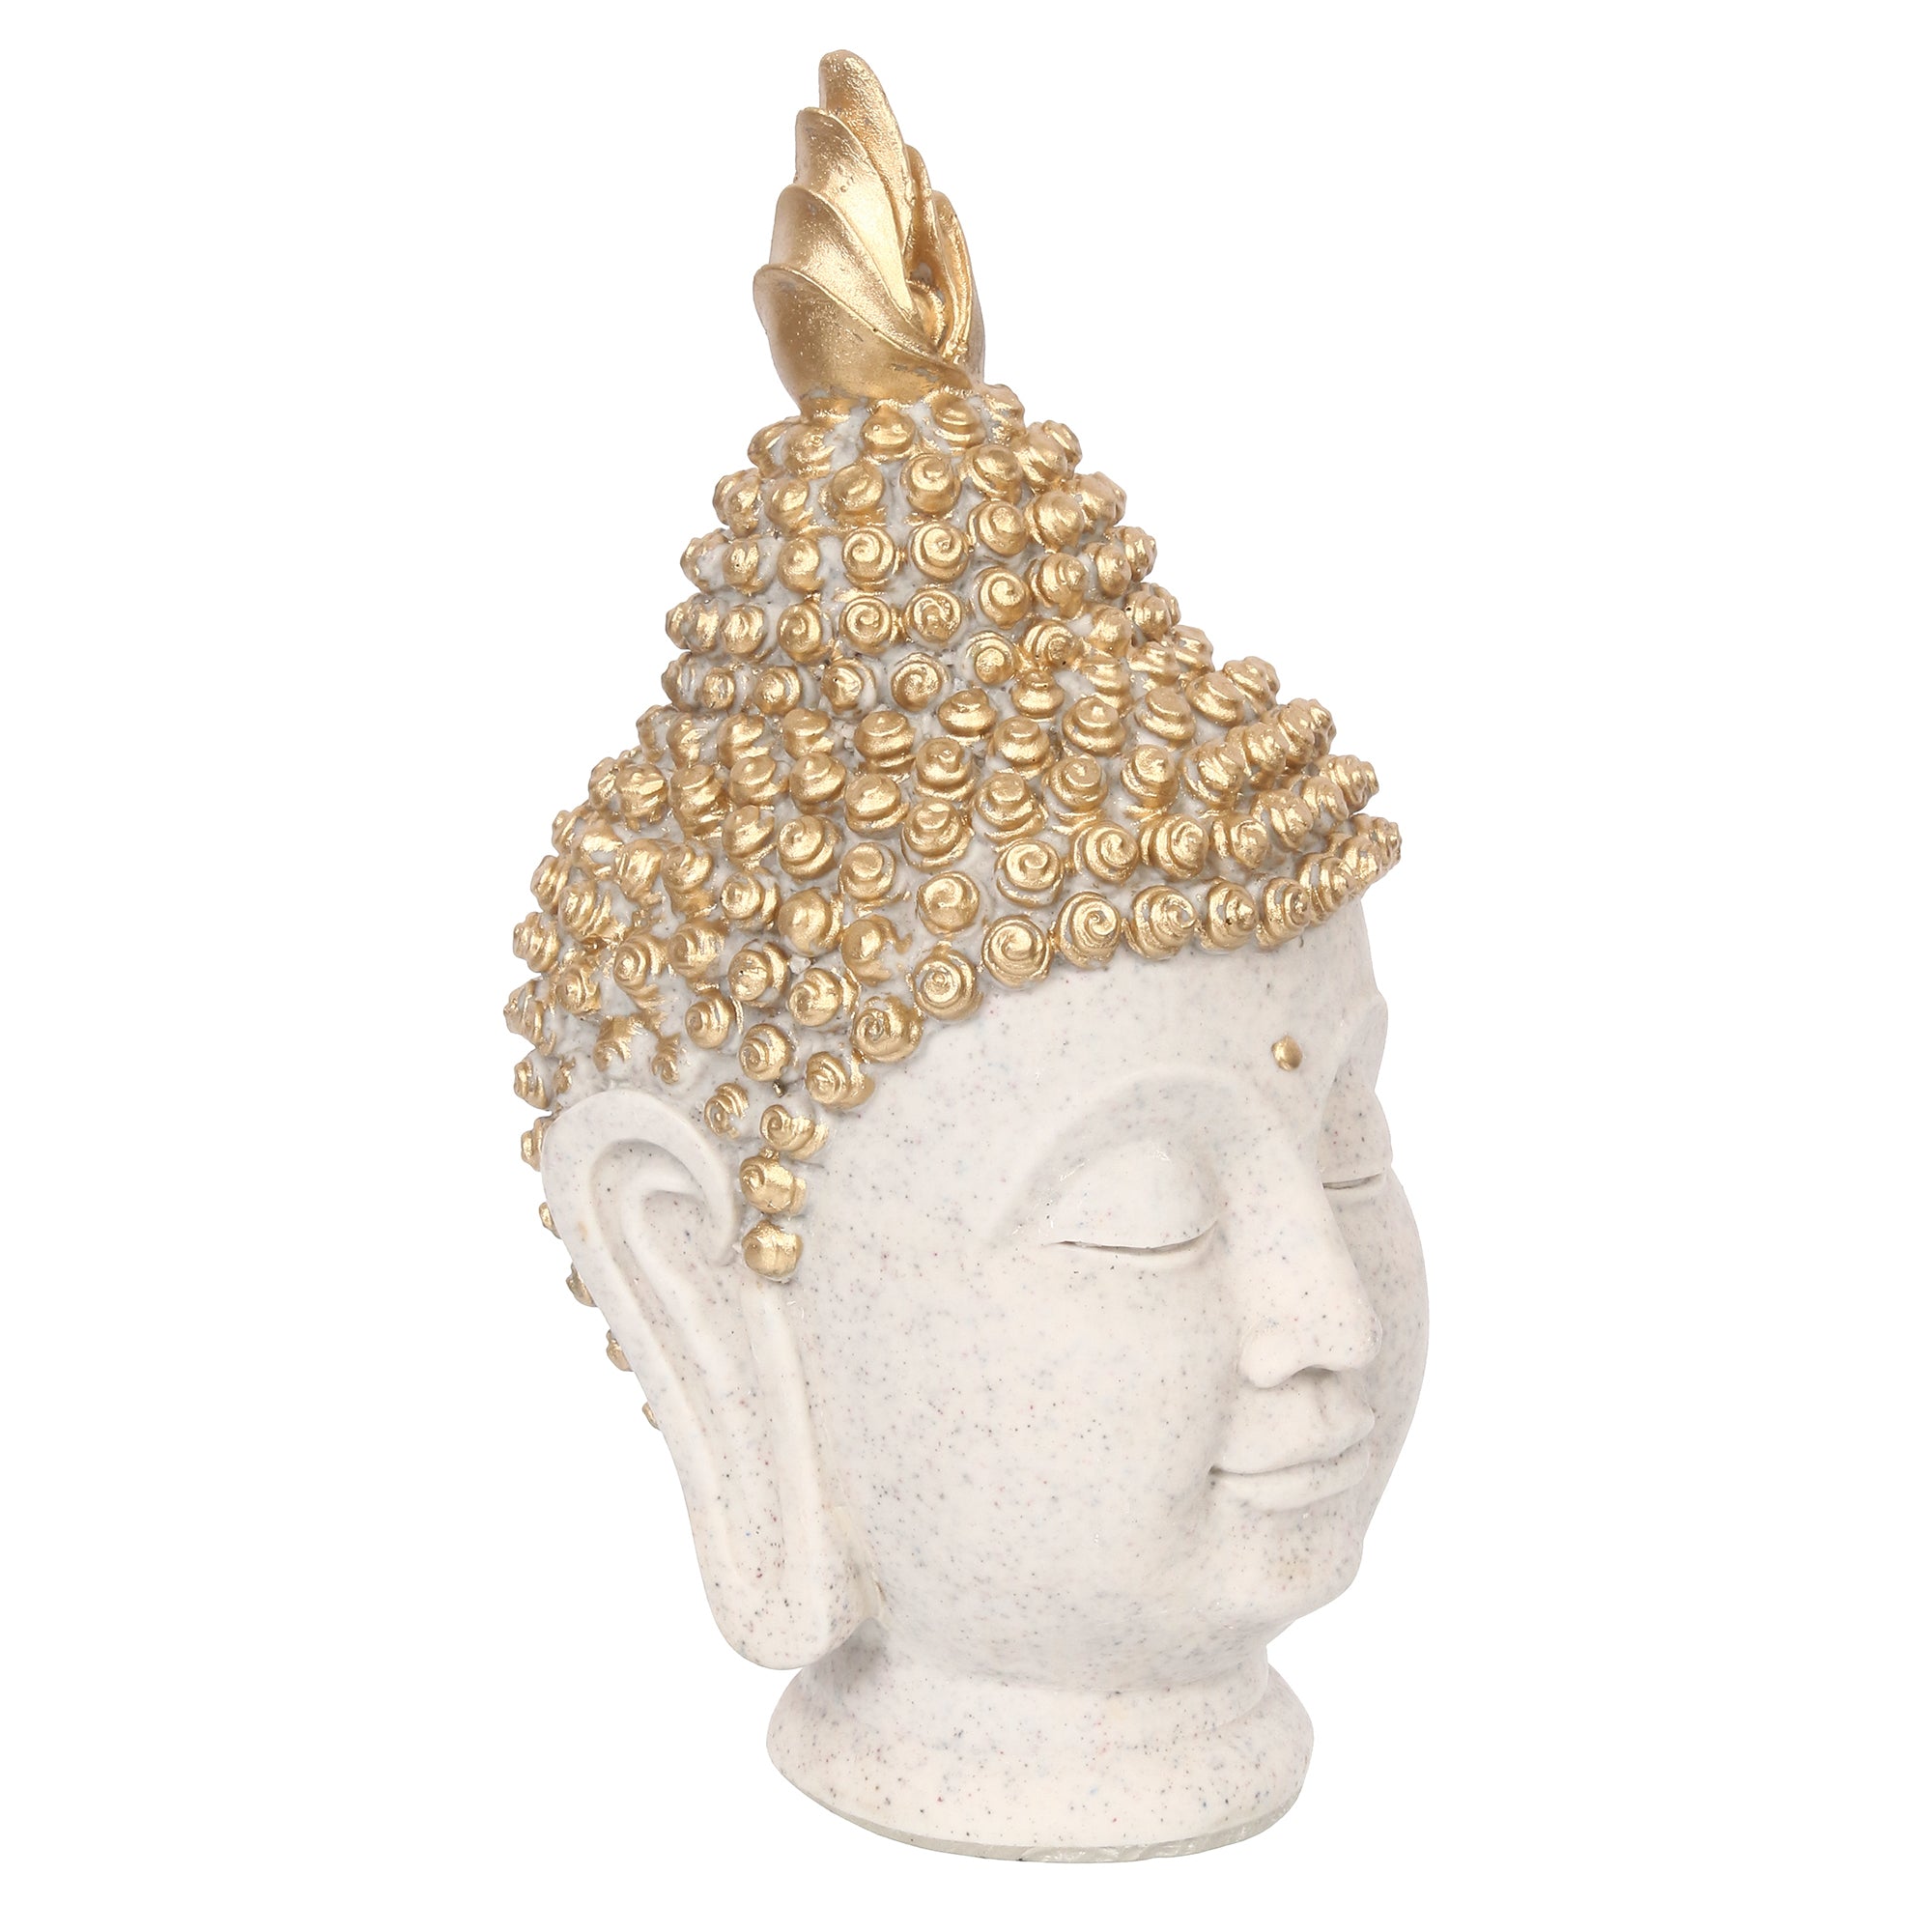 Polyresin Gold and White Meditating Buddha Head Statue 3